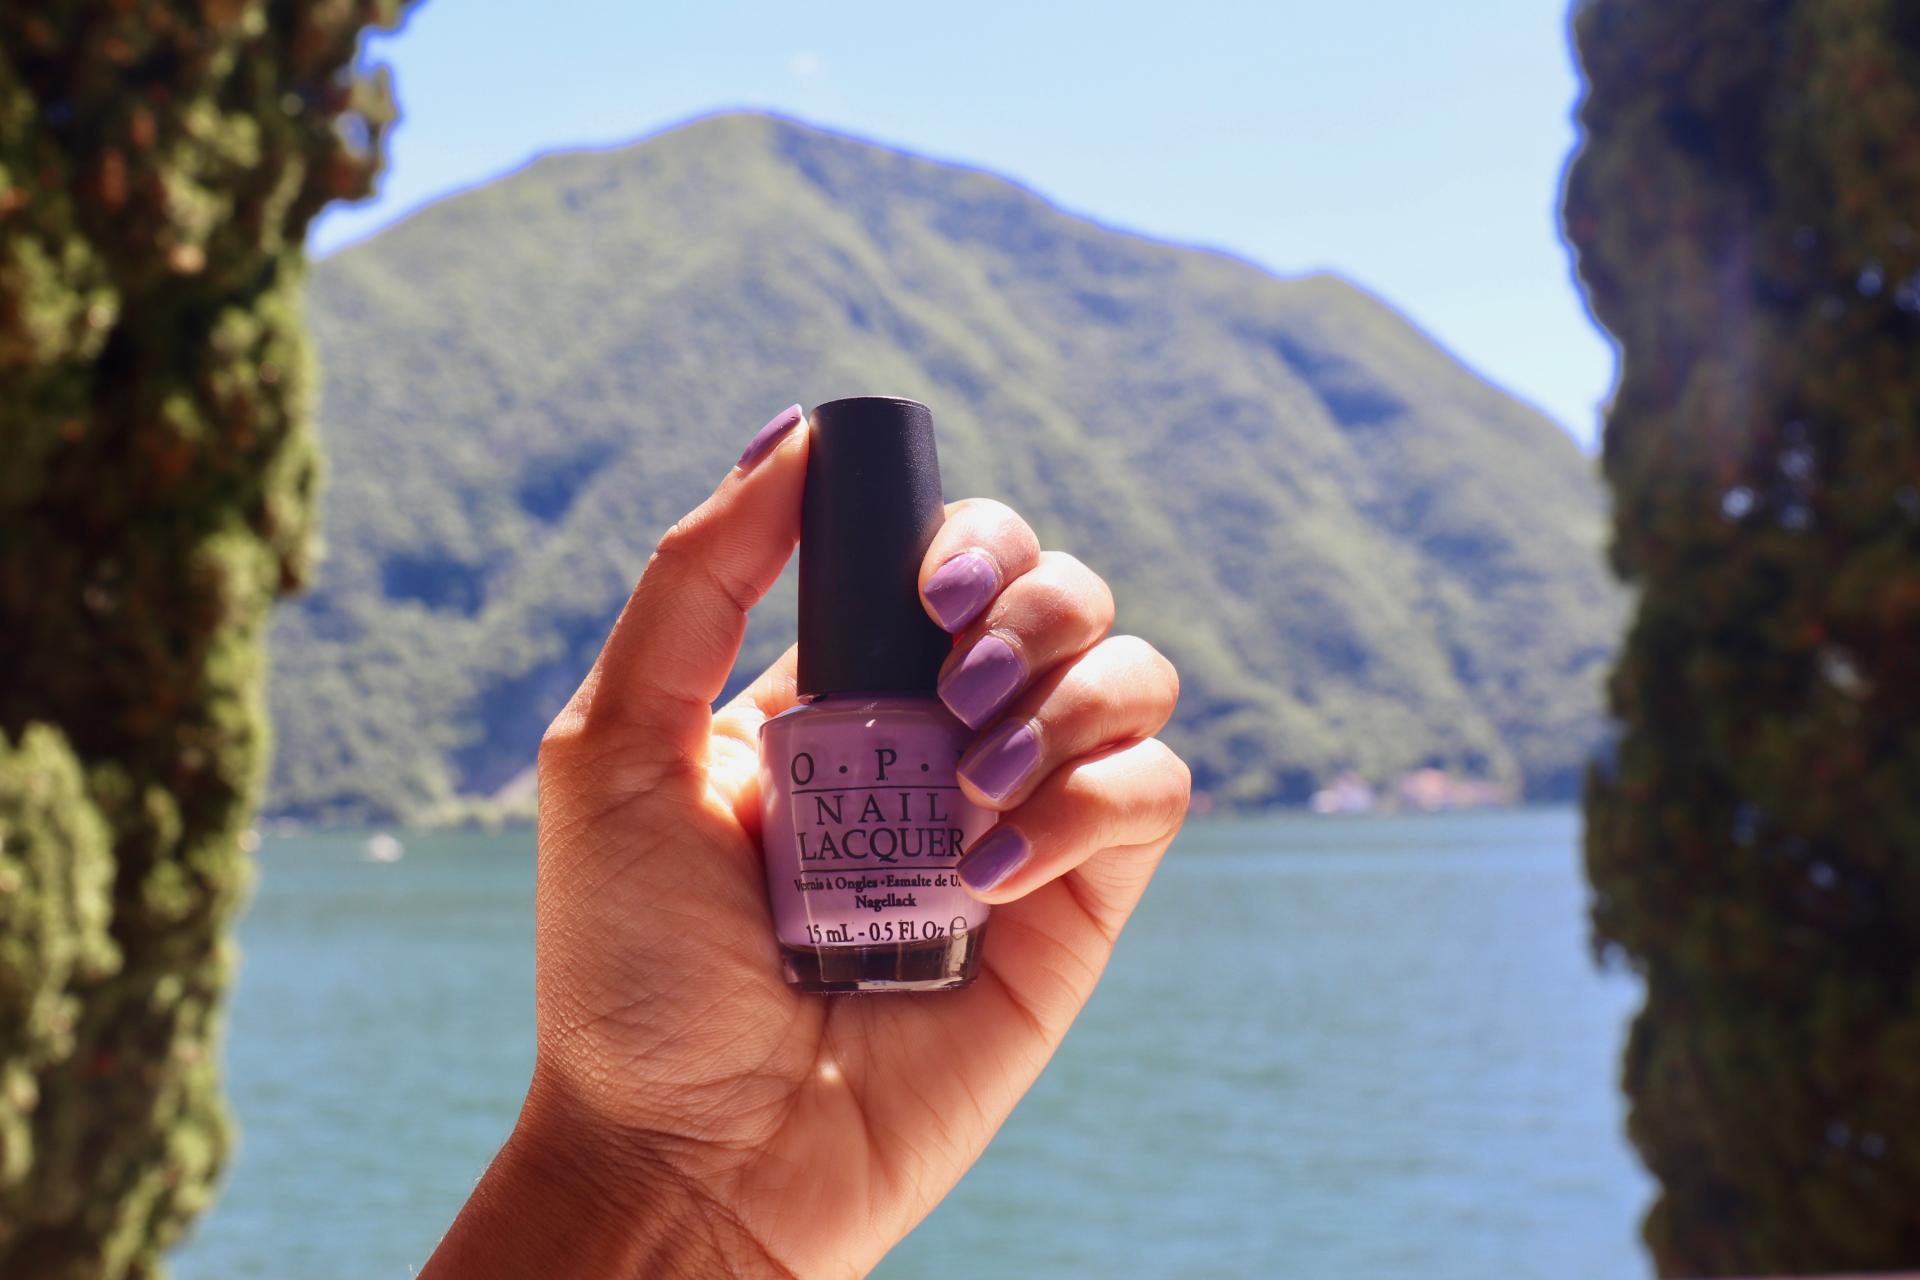 Manicure with a view